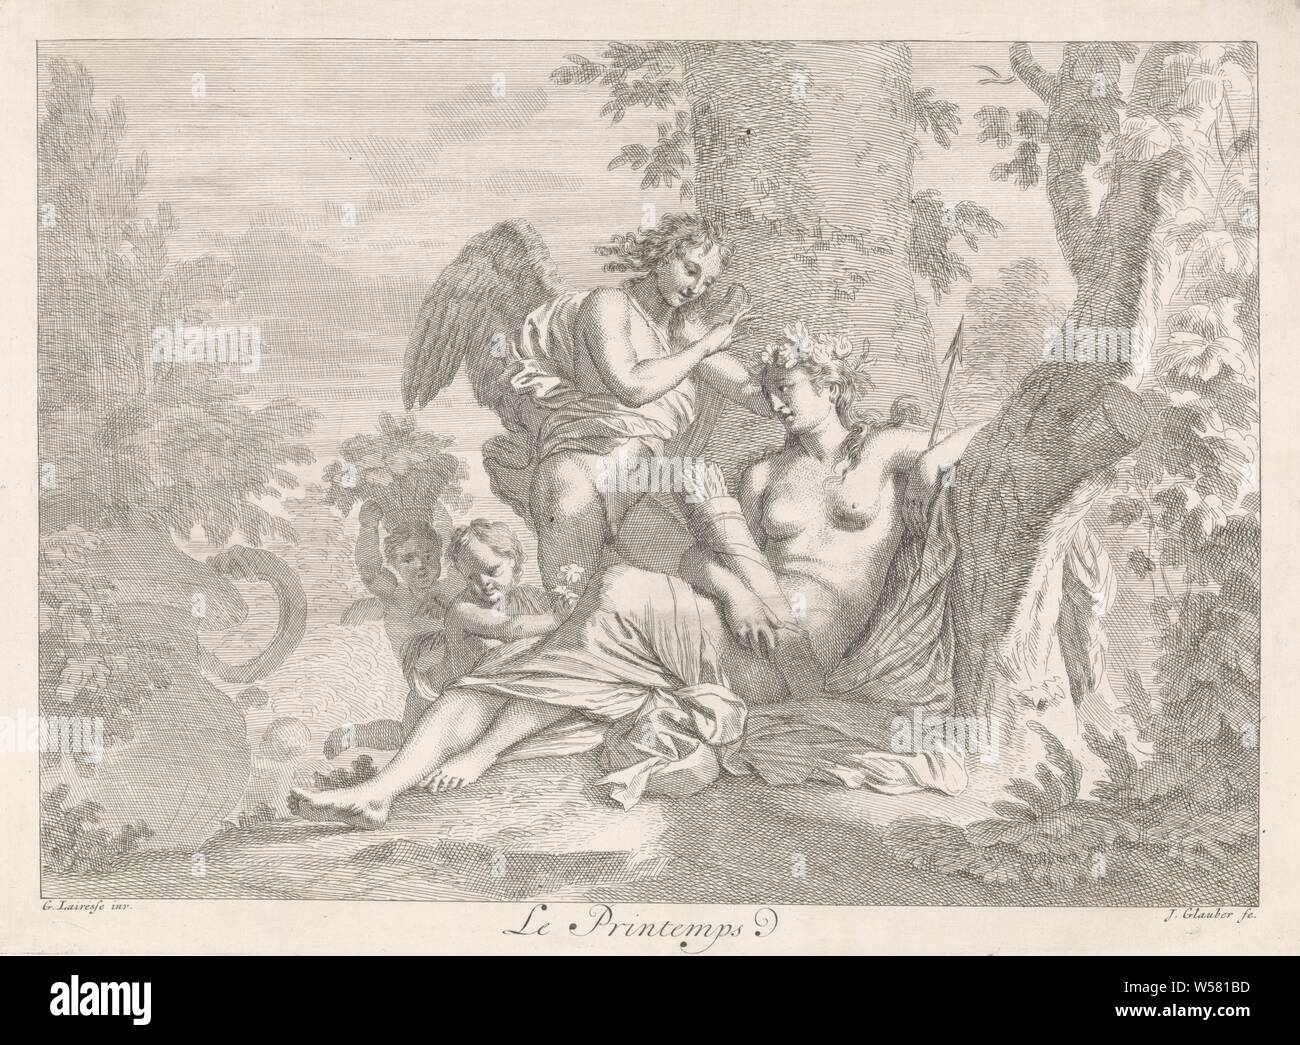 Venus and Cupid - Spring Le printemps (title on object) Biblical, mythological and allegorical representations (series title), Venus is leaning against a tree. An arrow quiver in her hands. Cupid stands bent over her and picks flowers from her flower crown. They are surrounded by two putti. The print is part of a series with Biblical, mythological and allegorical representations., Venus and Cupid (Cupid not being mere attribute), spring, 'Ver', 'Primavera' (Ripa) (with Venus), Johannes Glauber (mentioned on object), 1656 - 1726, paper, etching, h 280 mm × w 382 mm Stock Photo